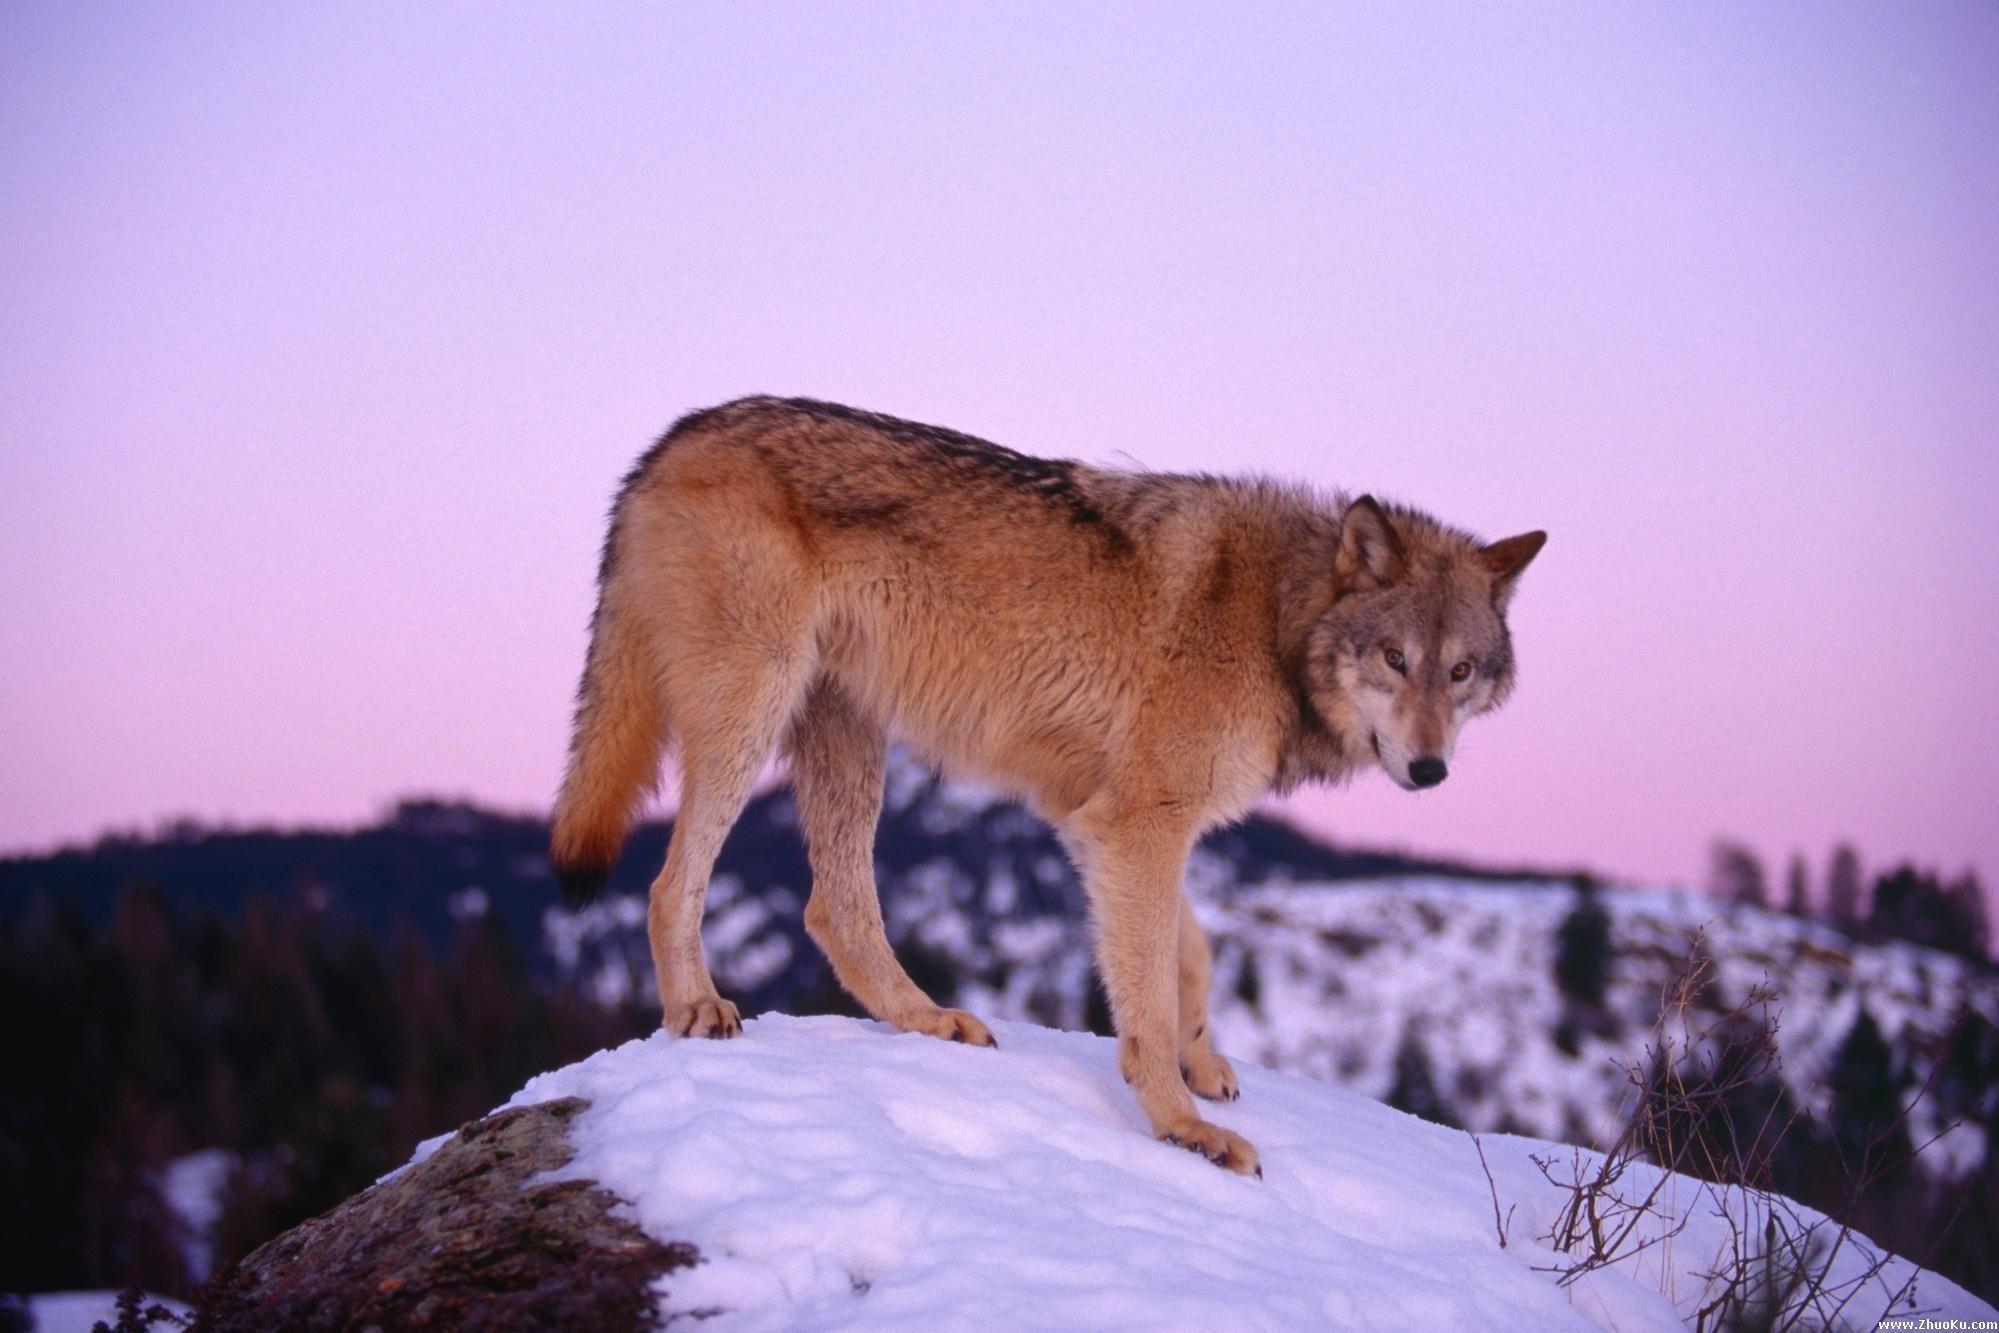 Animals For > Lone Wolf Wallpaper 1080p